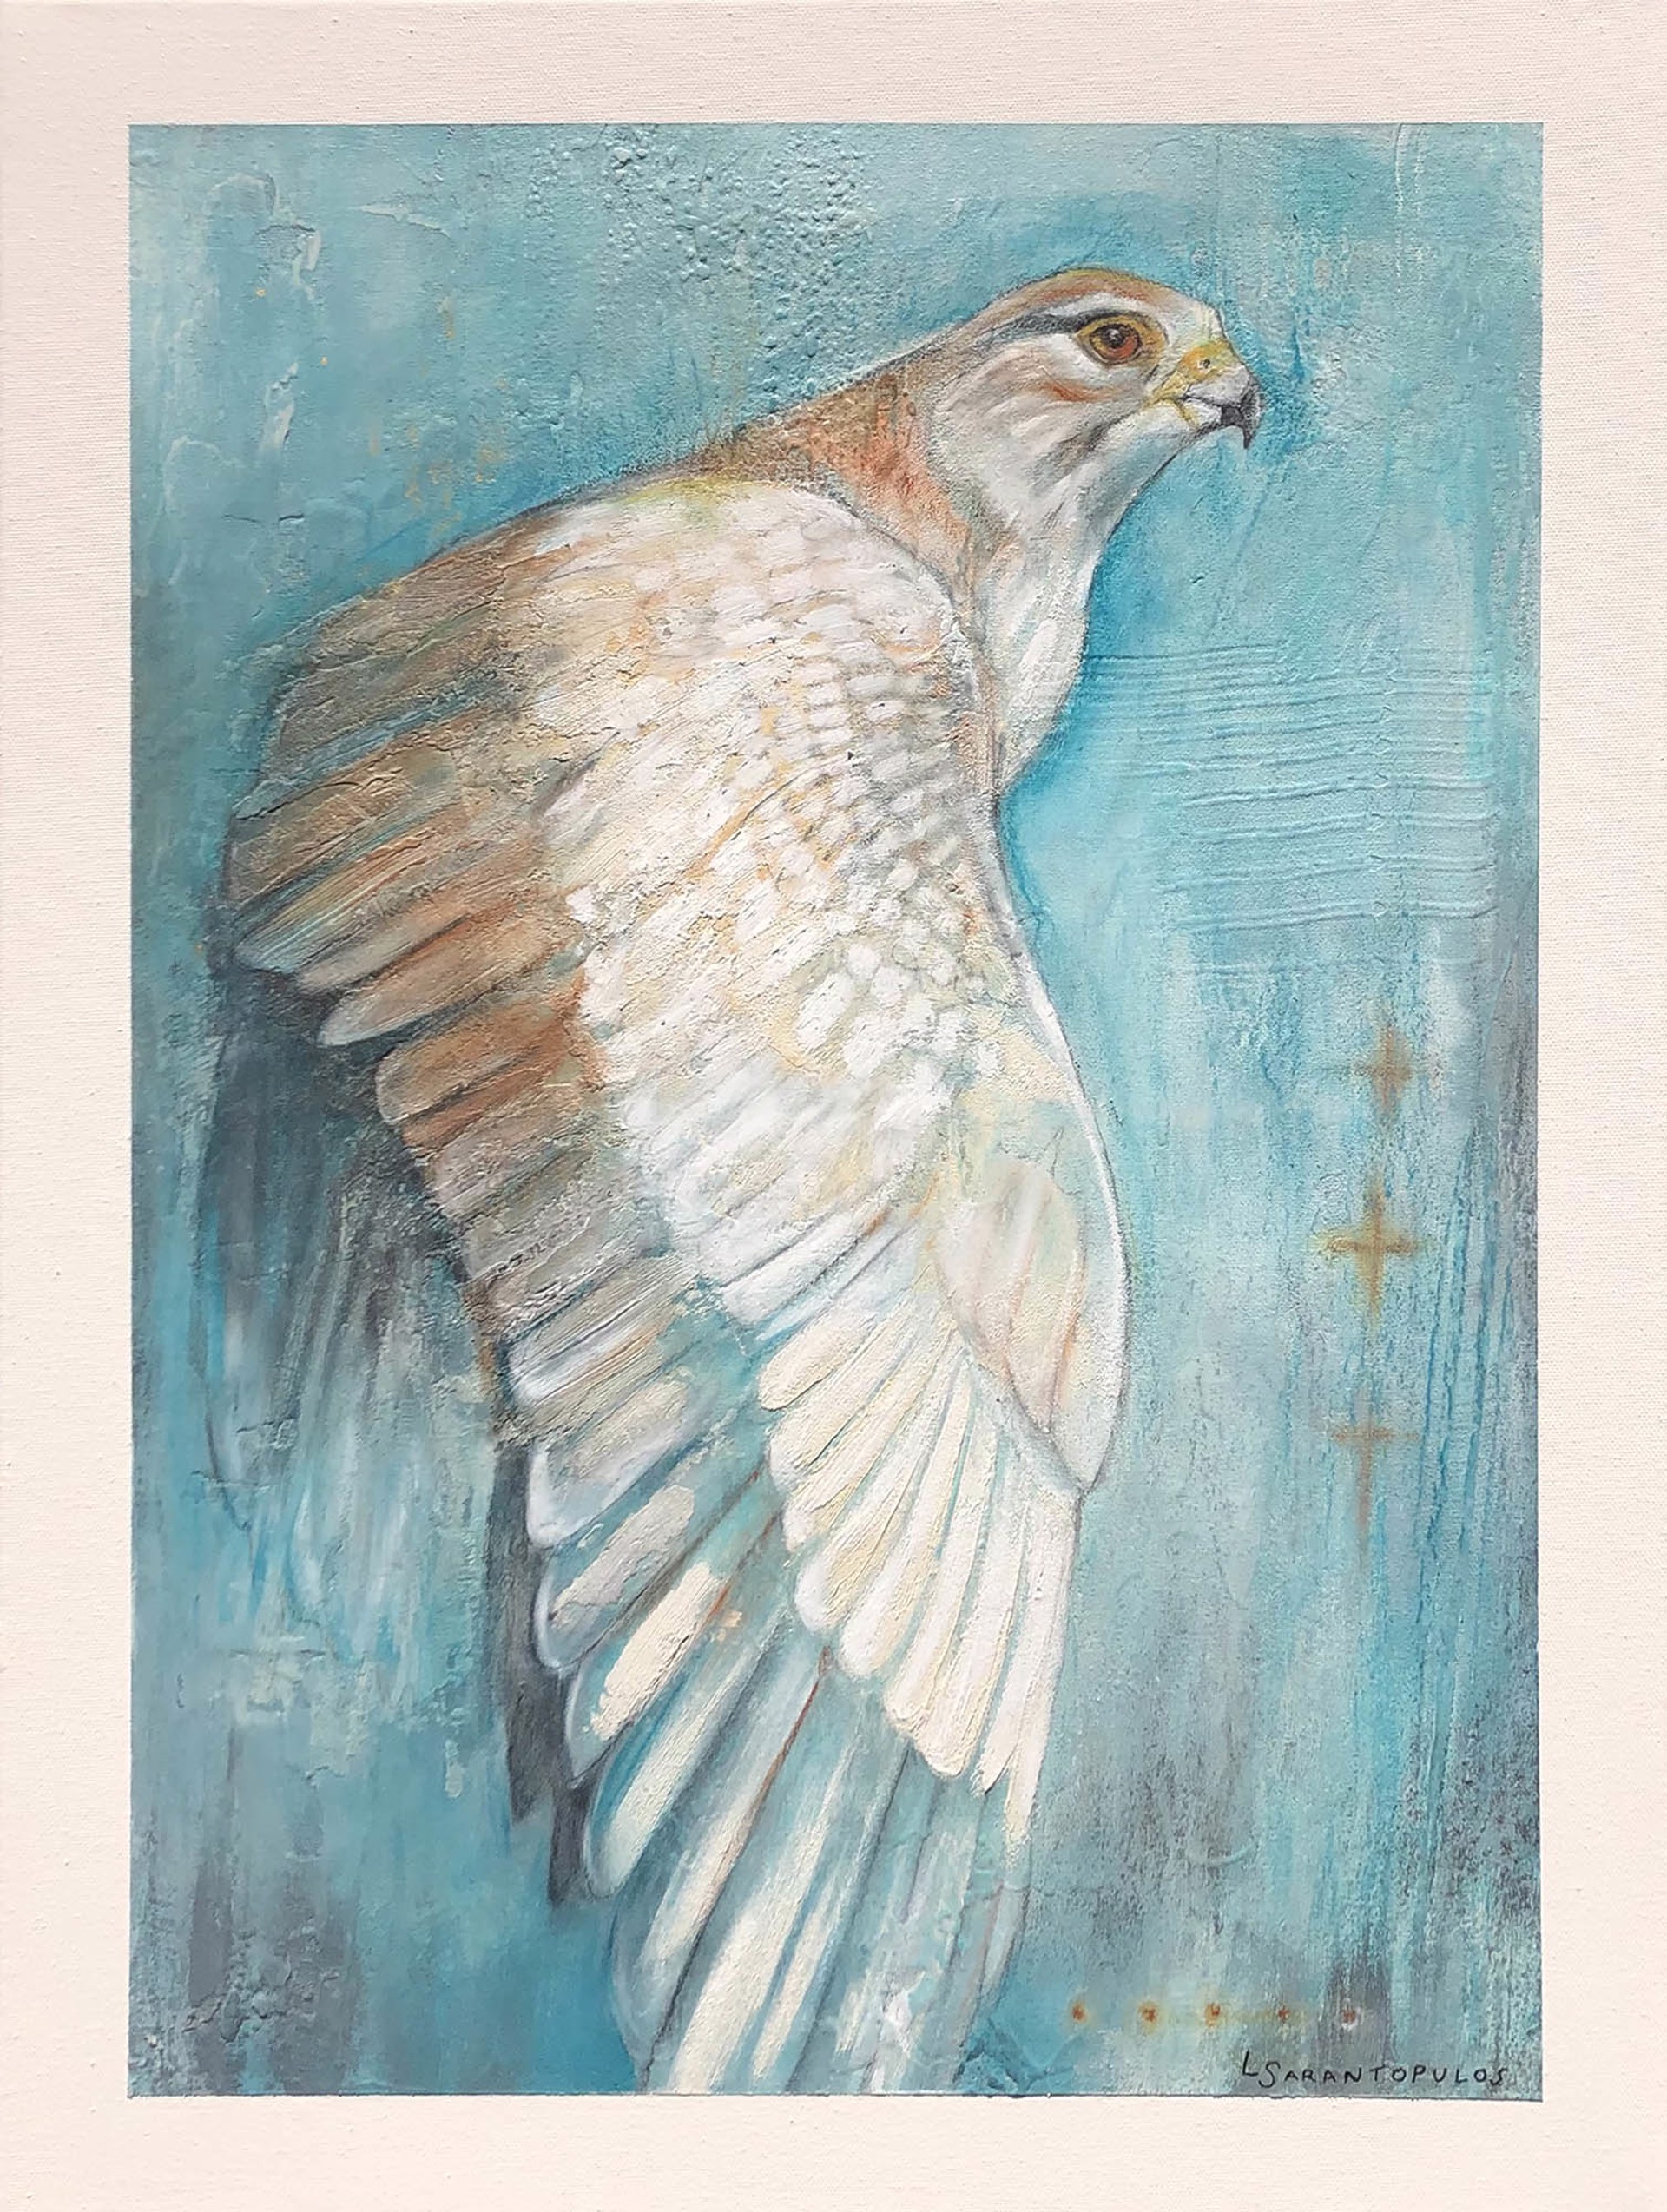 Original Mixed Media Painting Featuring A Hawk Over Blue Background